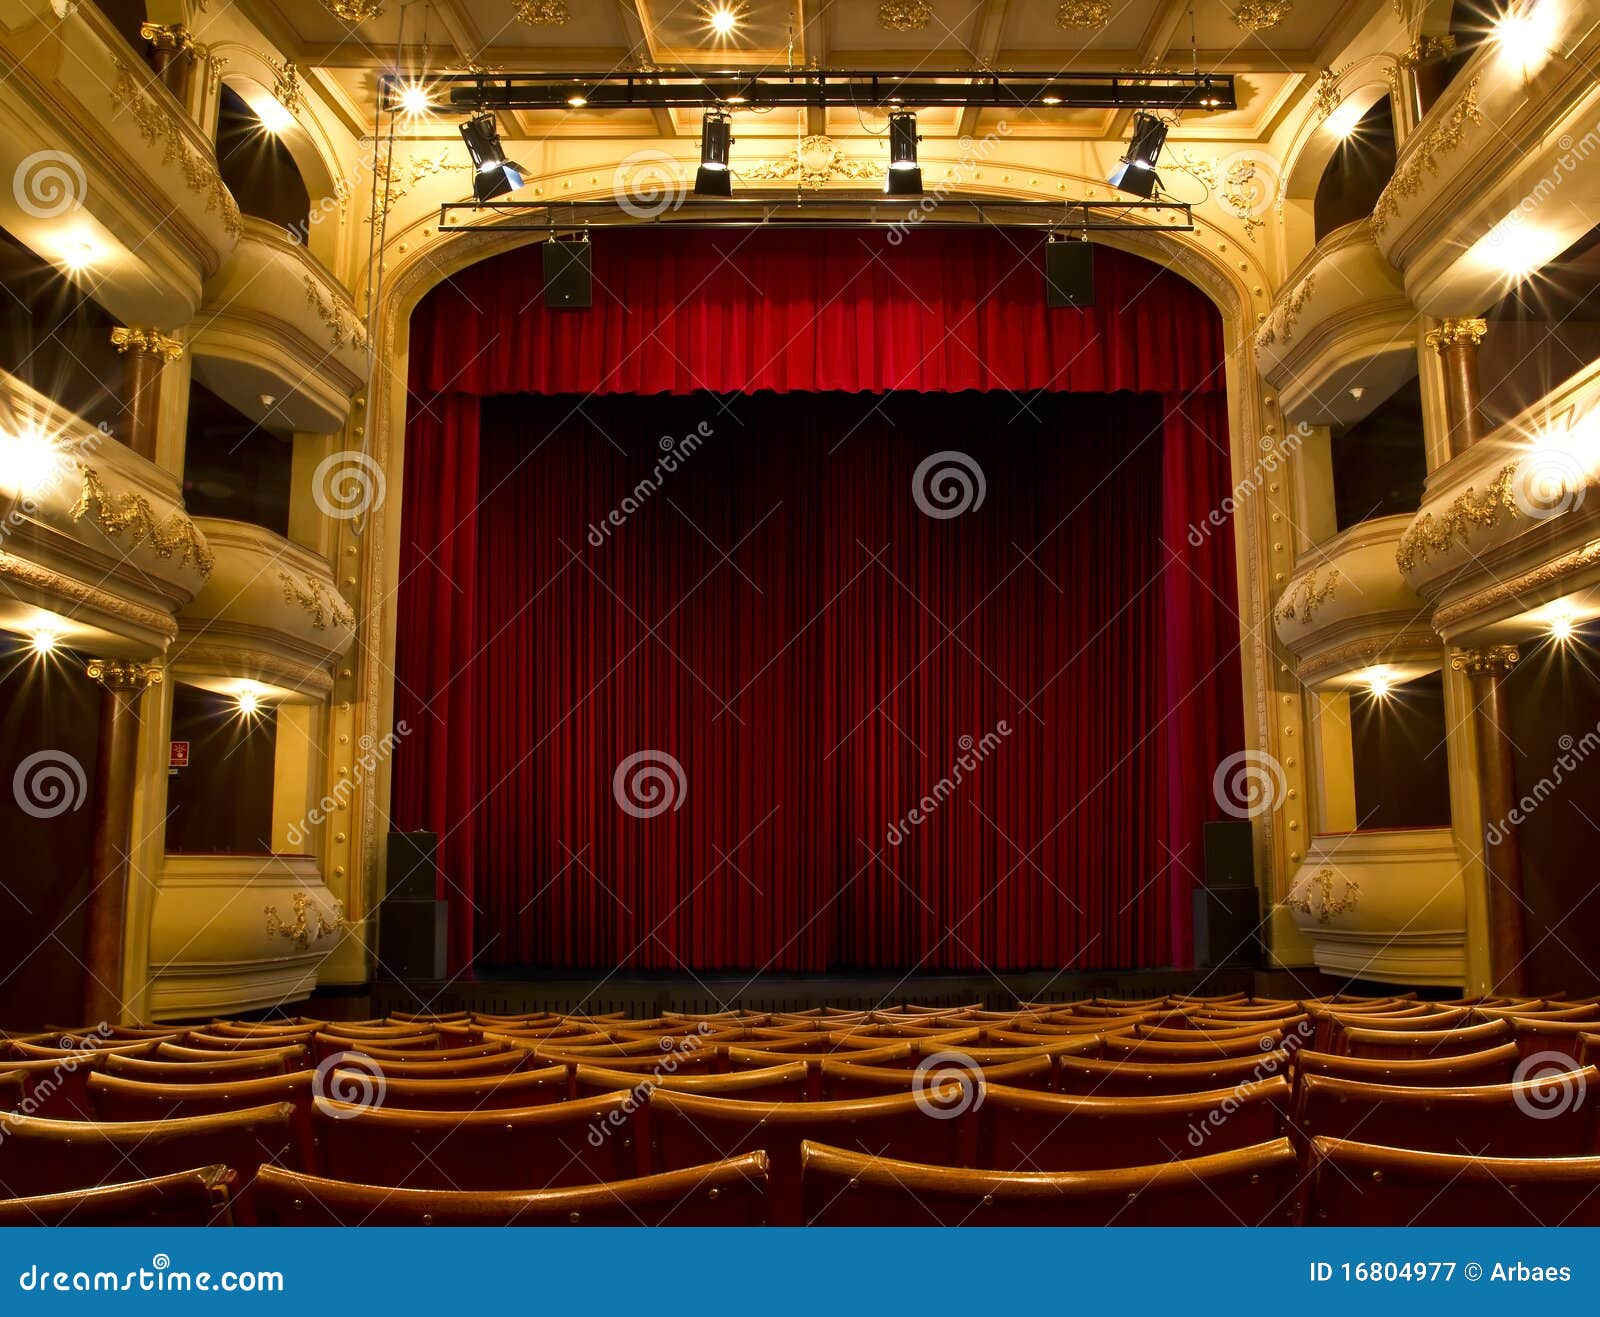 old theater stage and red curtain